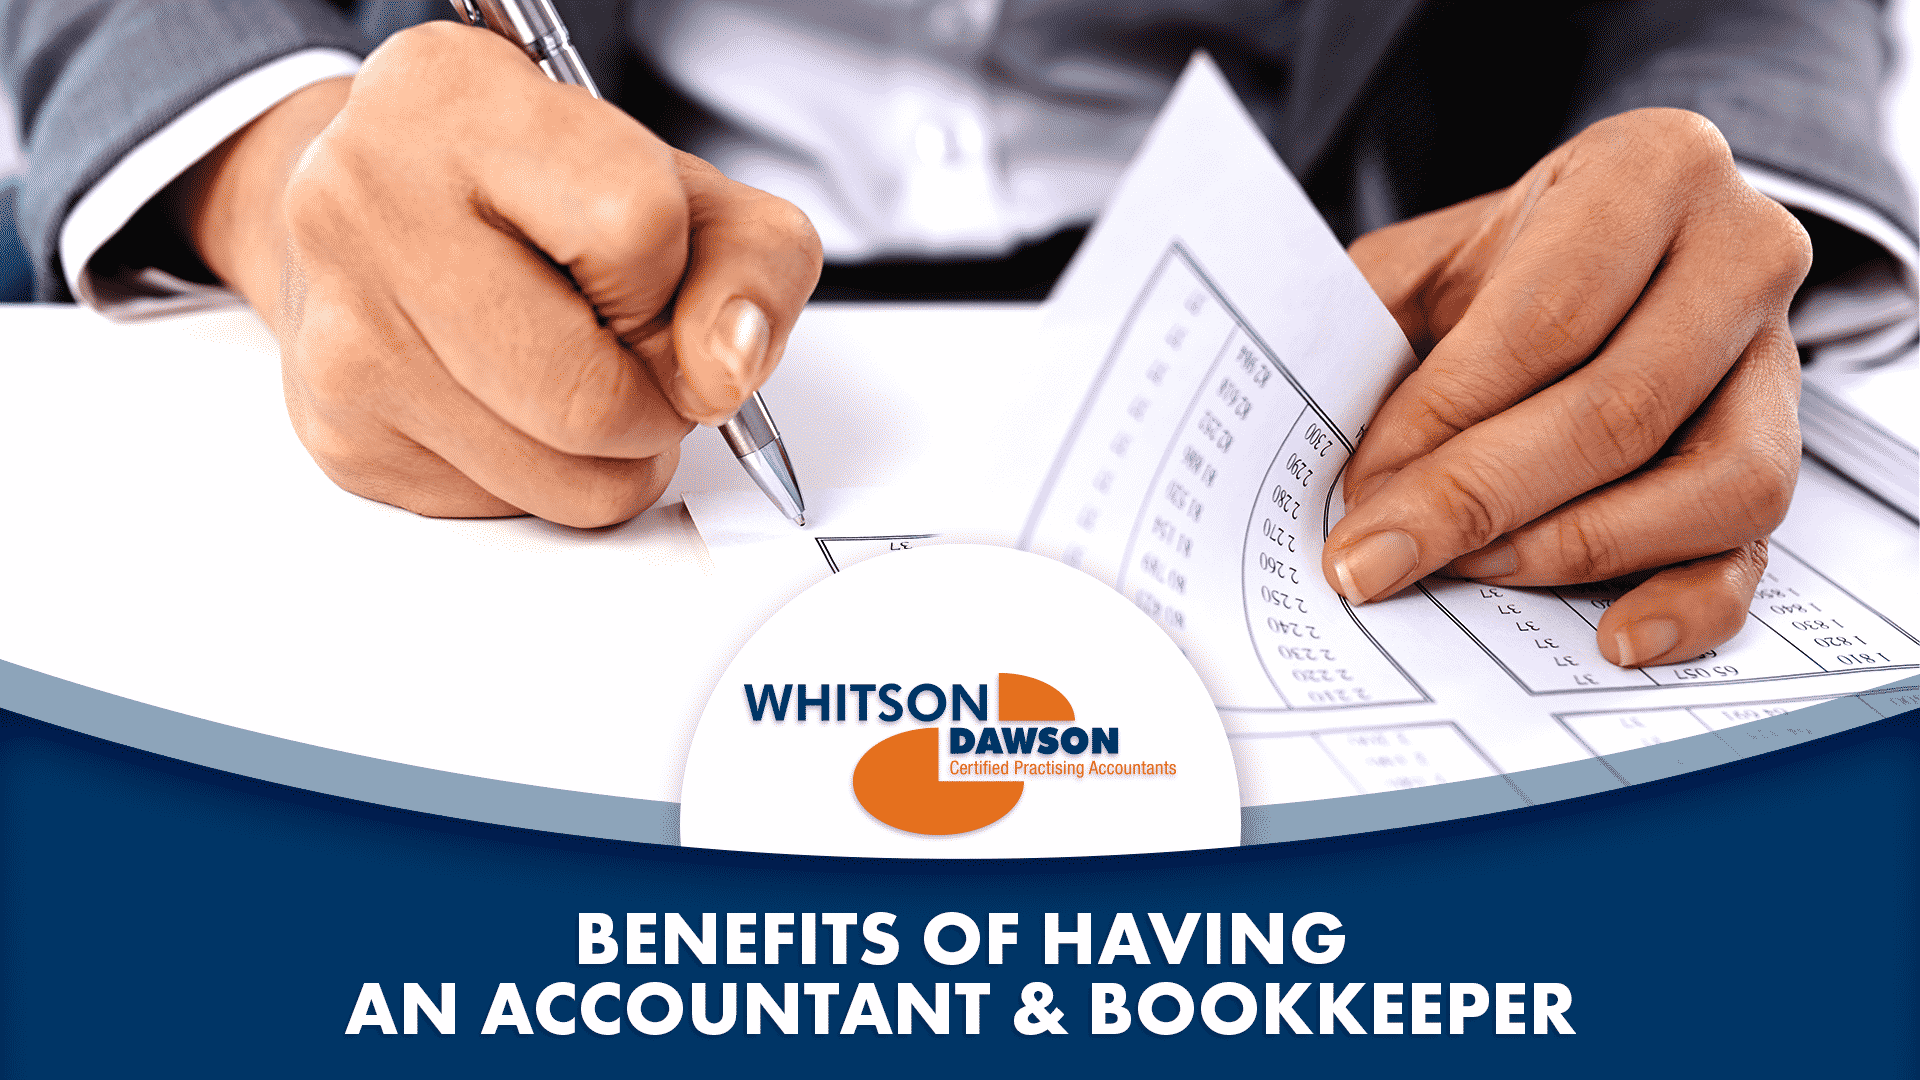 Make 2022 the year to get an accountant and bookkeeper